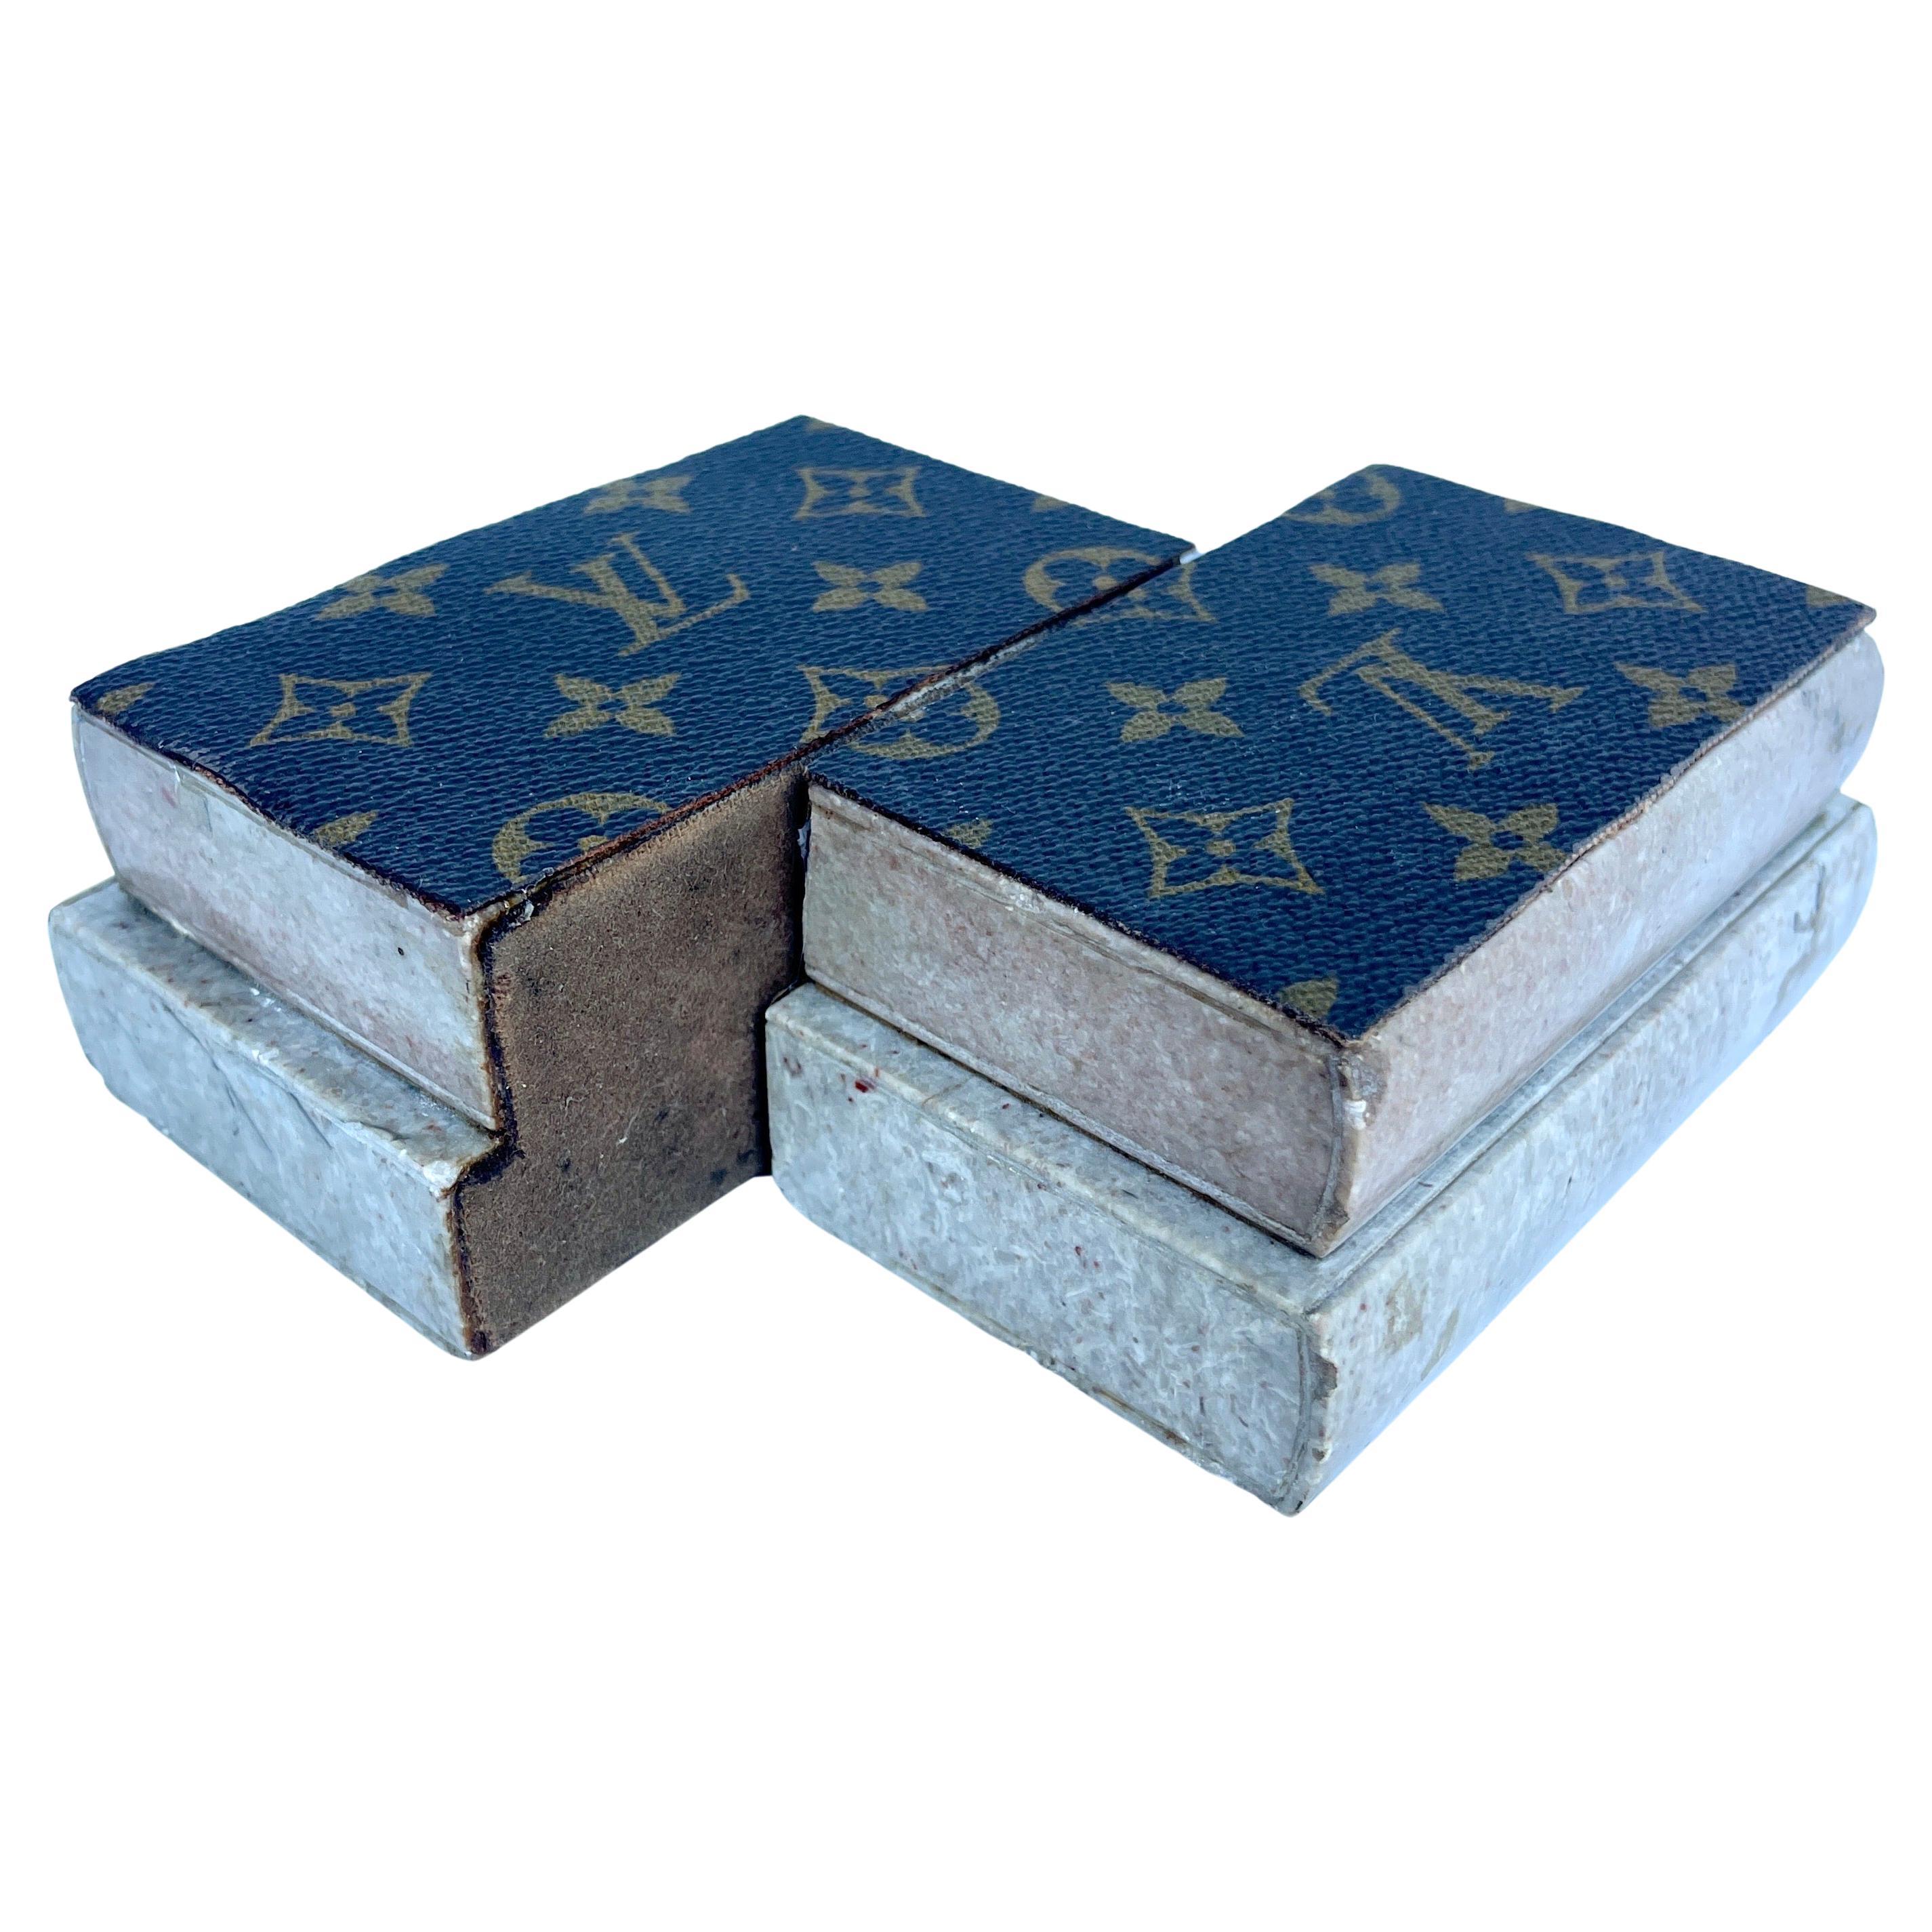 Pair Solid Marble Bookends with Louis Vuitton Monogram Leather